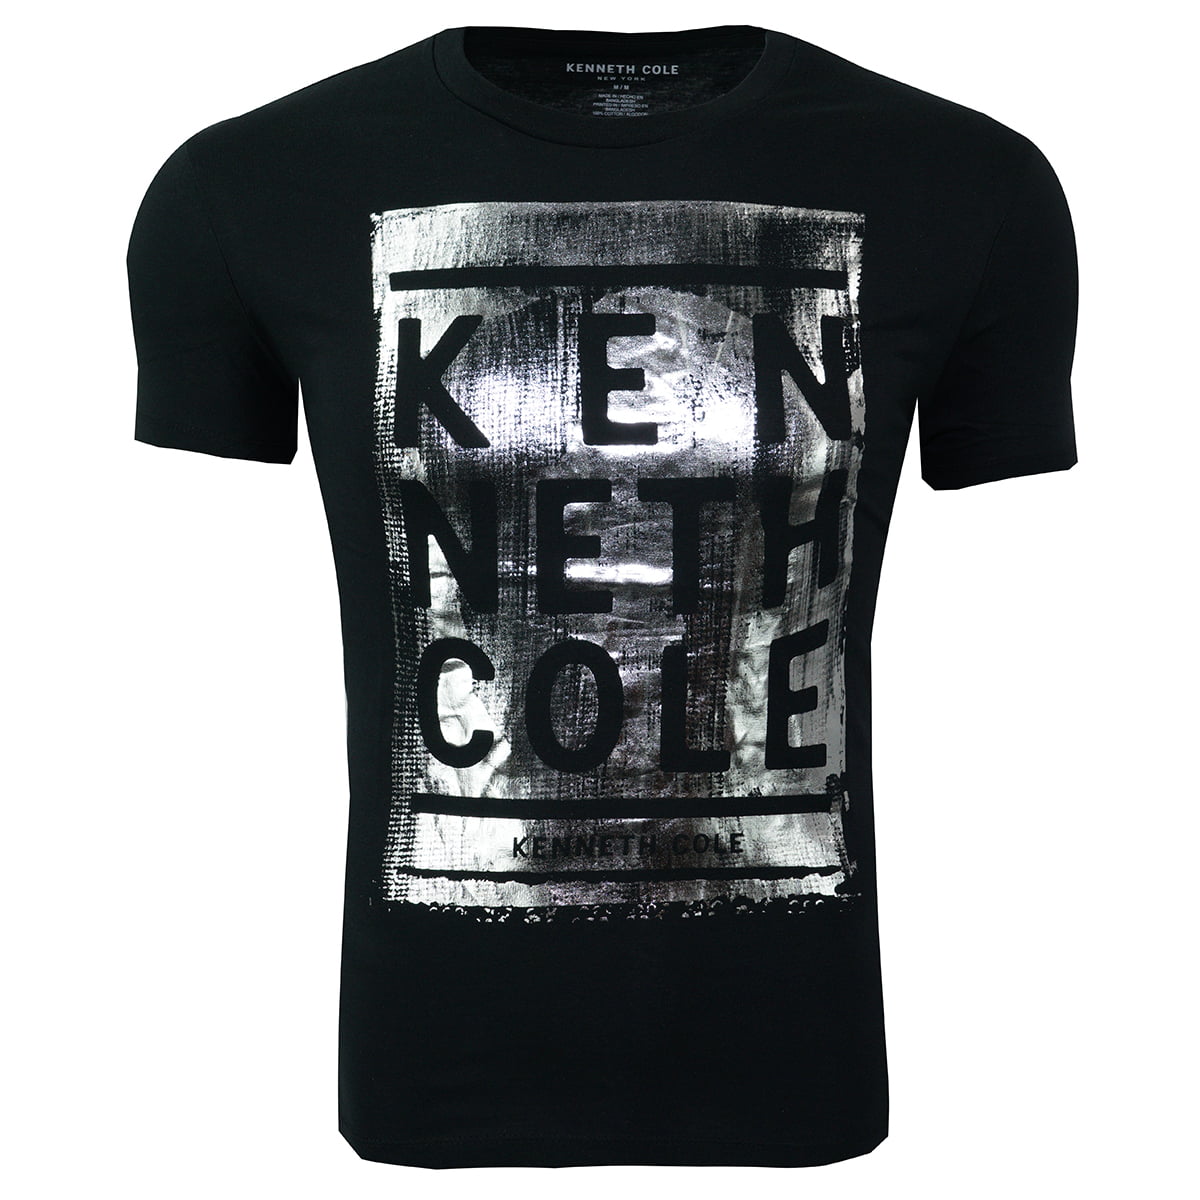 Kenneth Cole - Kenneth Cole New York Men's 